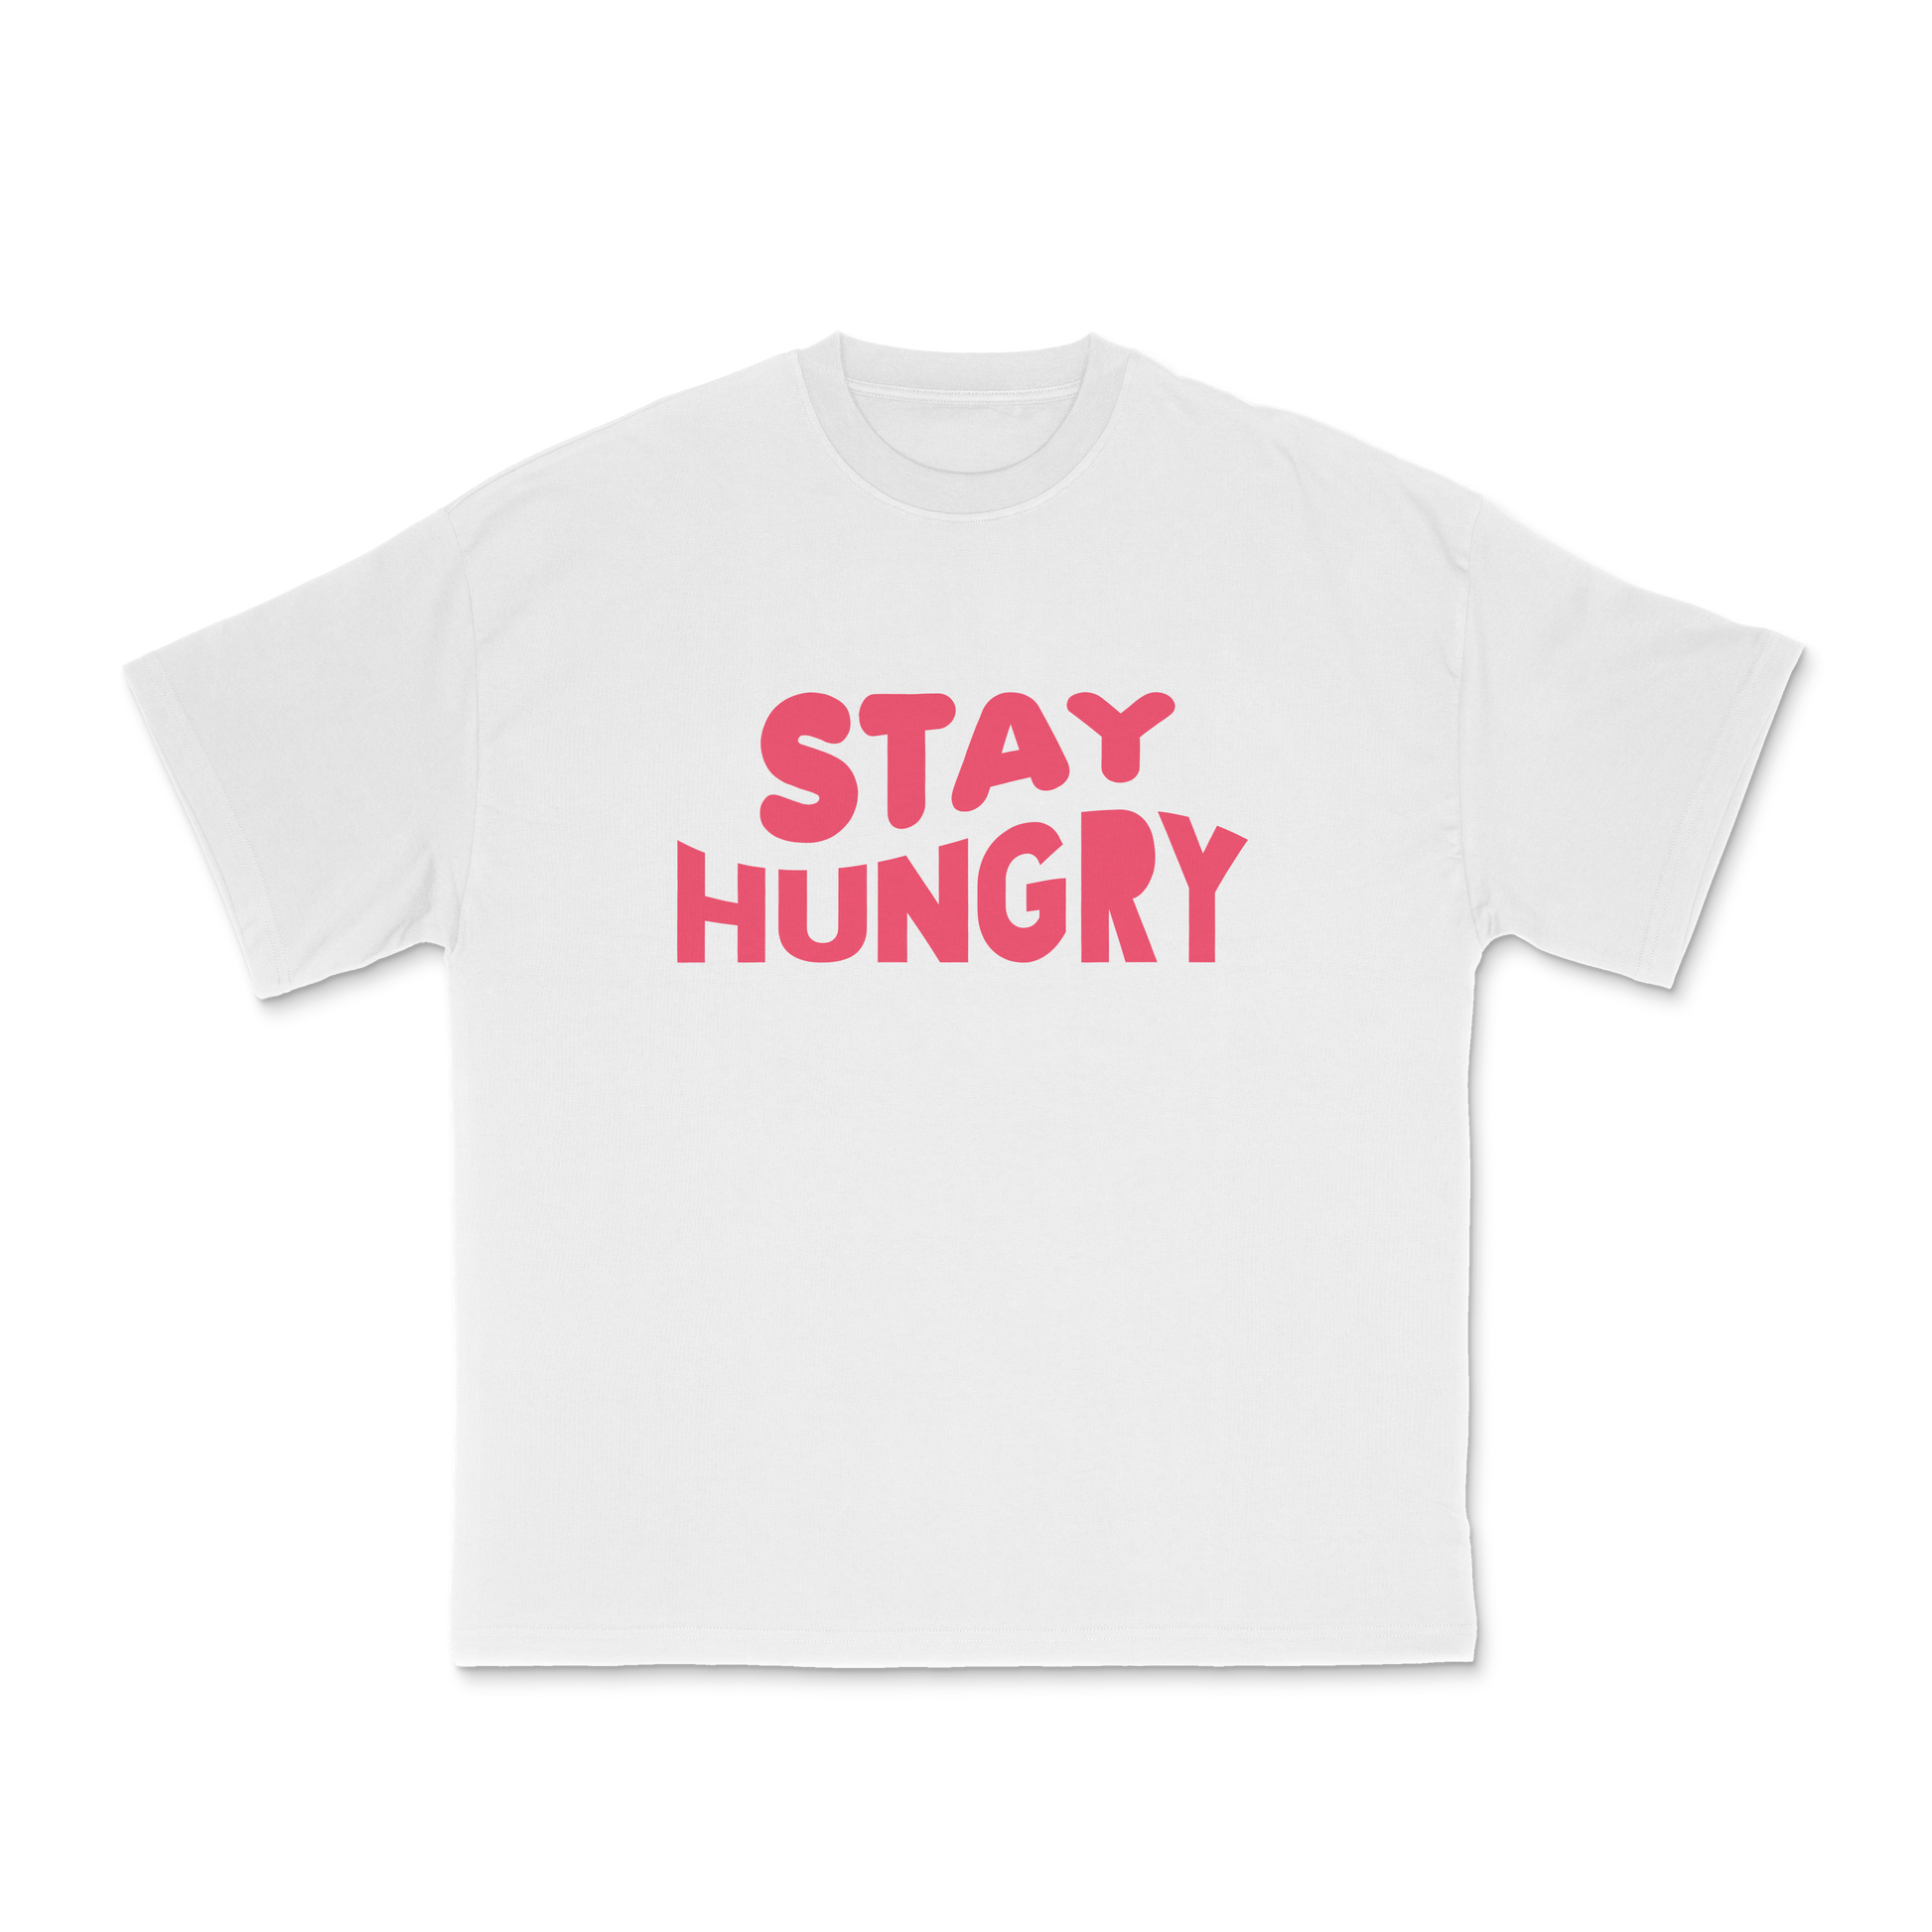 Stay Hungry Collectible T-shirt - NOMS LIFE